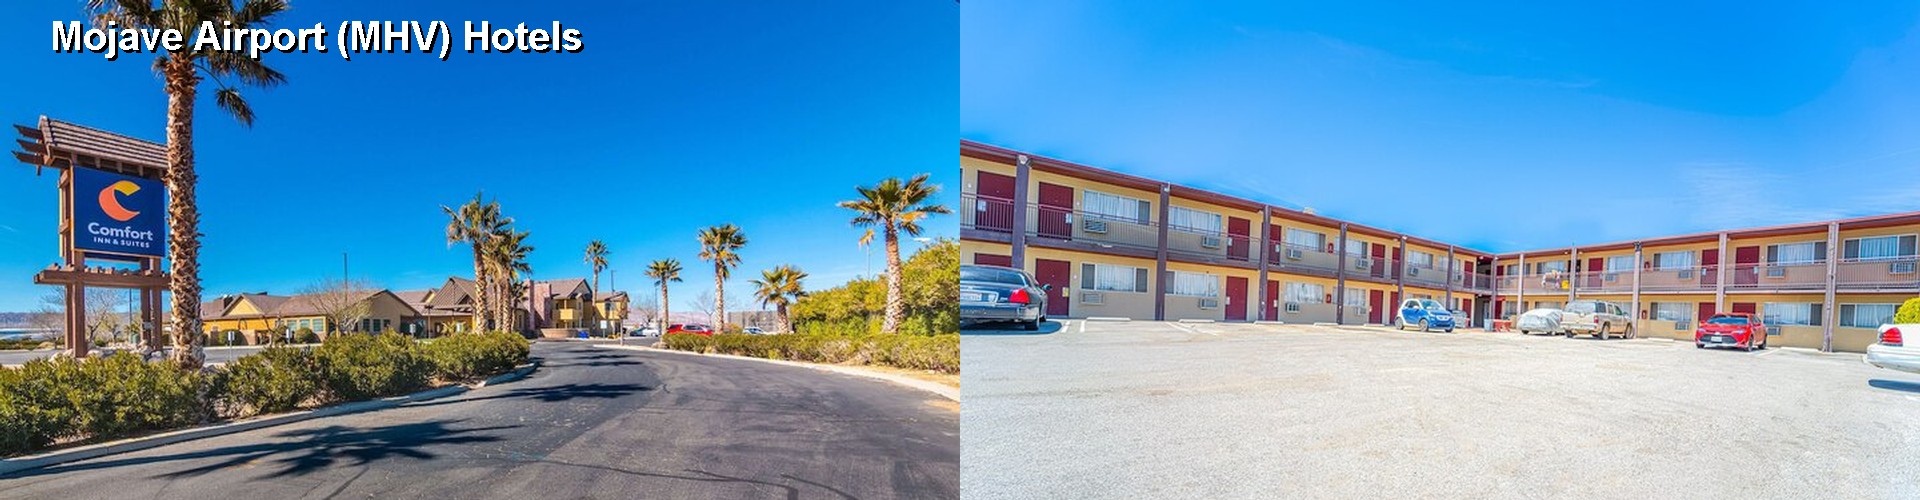 5 Best Hotels near Mojave Airport (MHV)